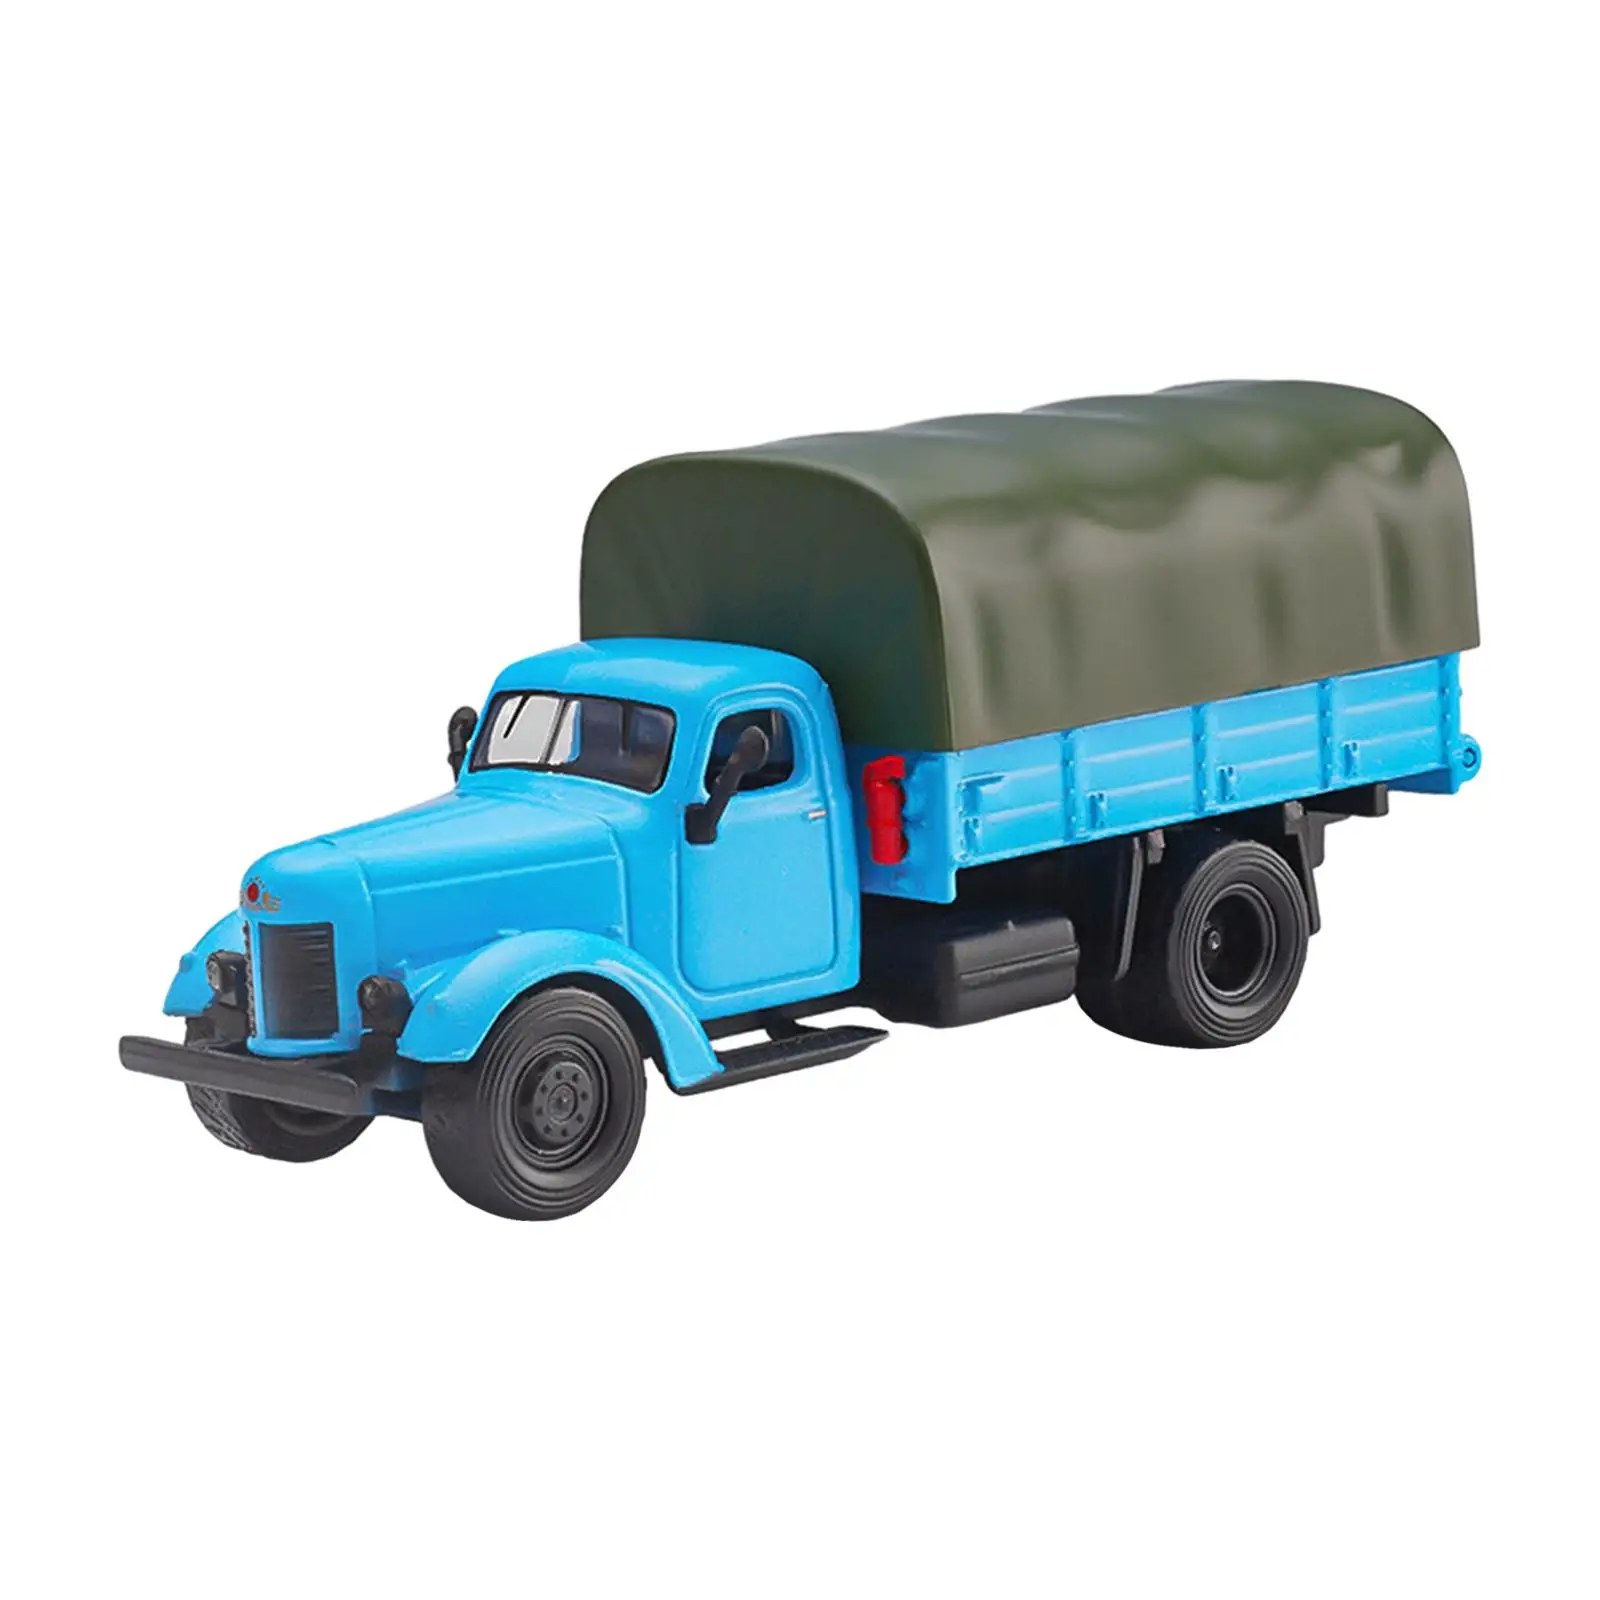 1/64 Transport Vehicle Hand Painted Layout Alloy Truck for Kids Adults Decor